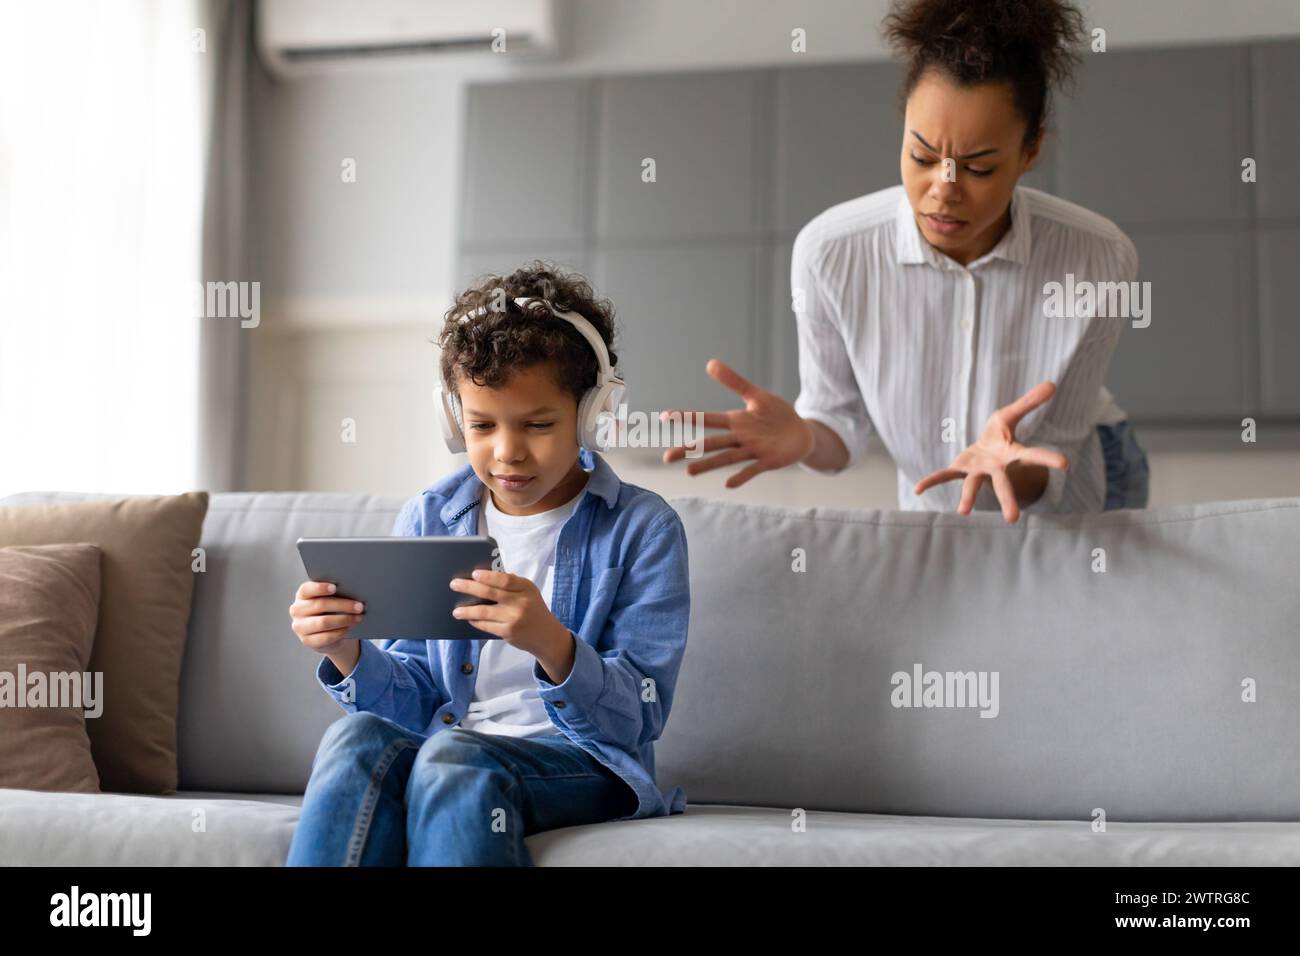 Mother concerned over son's device usage Stock Photo